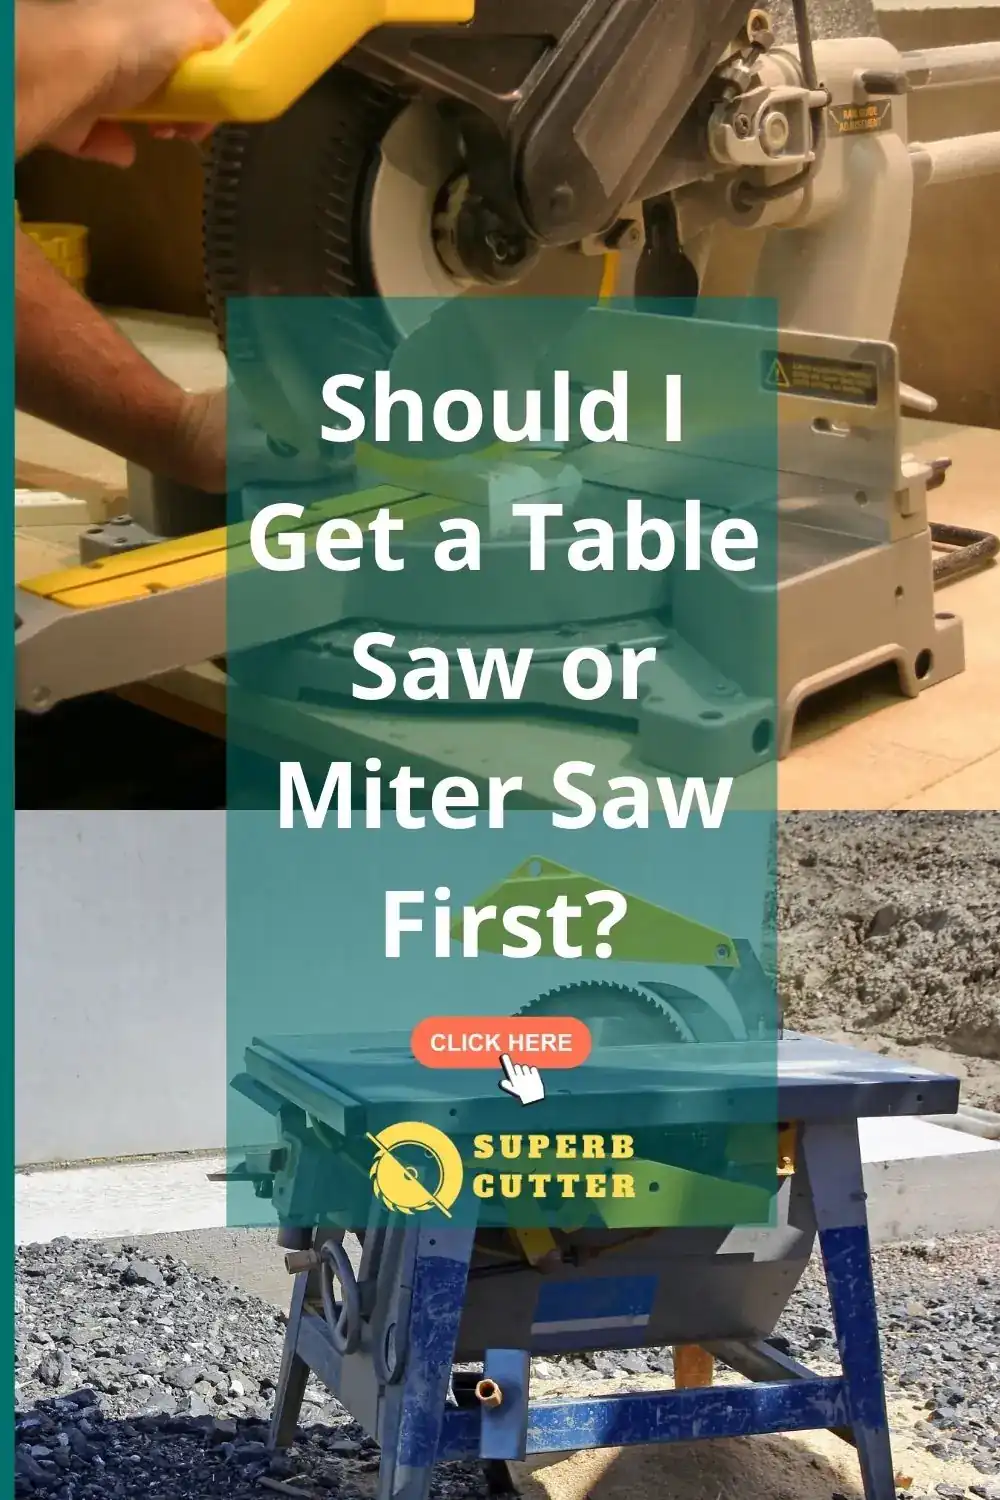 should i get a table saw or miter saw first?